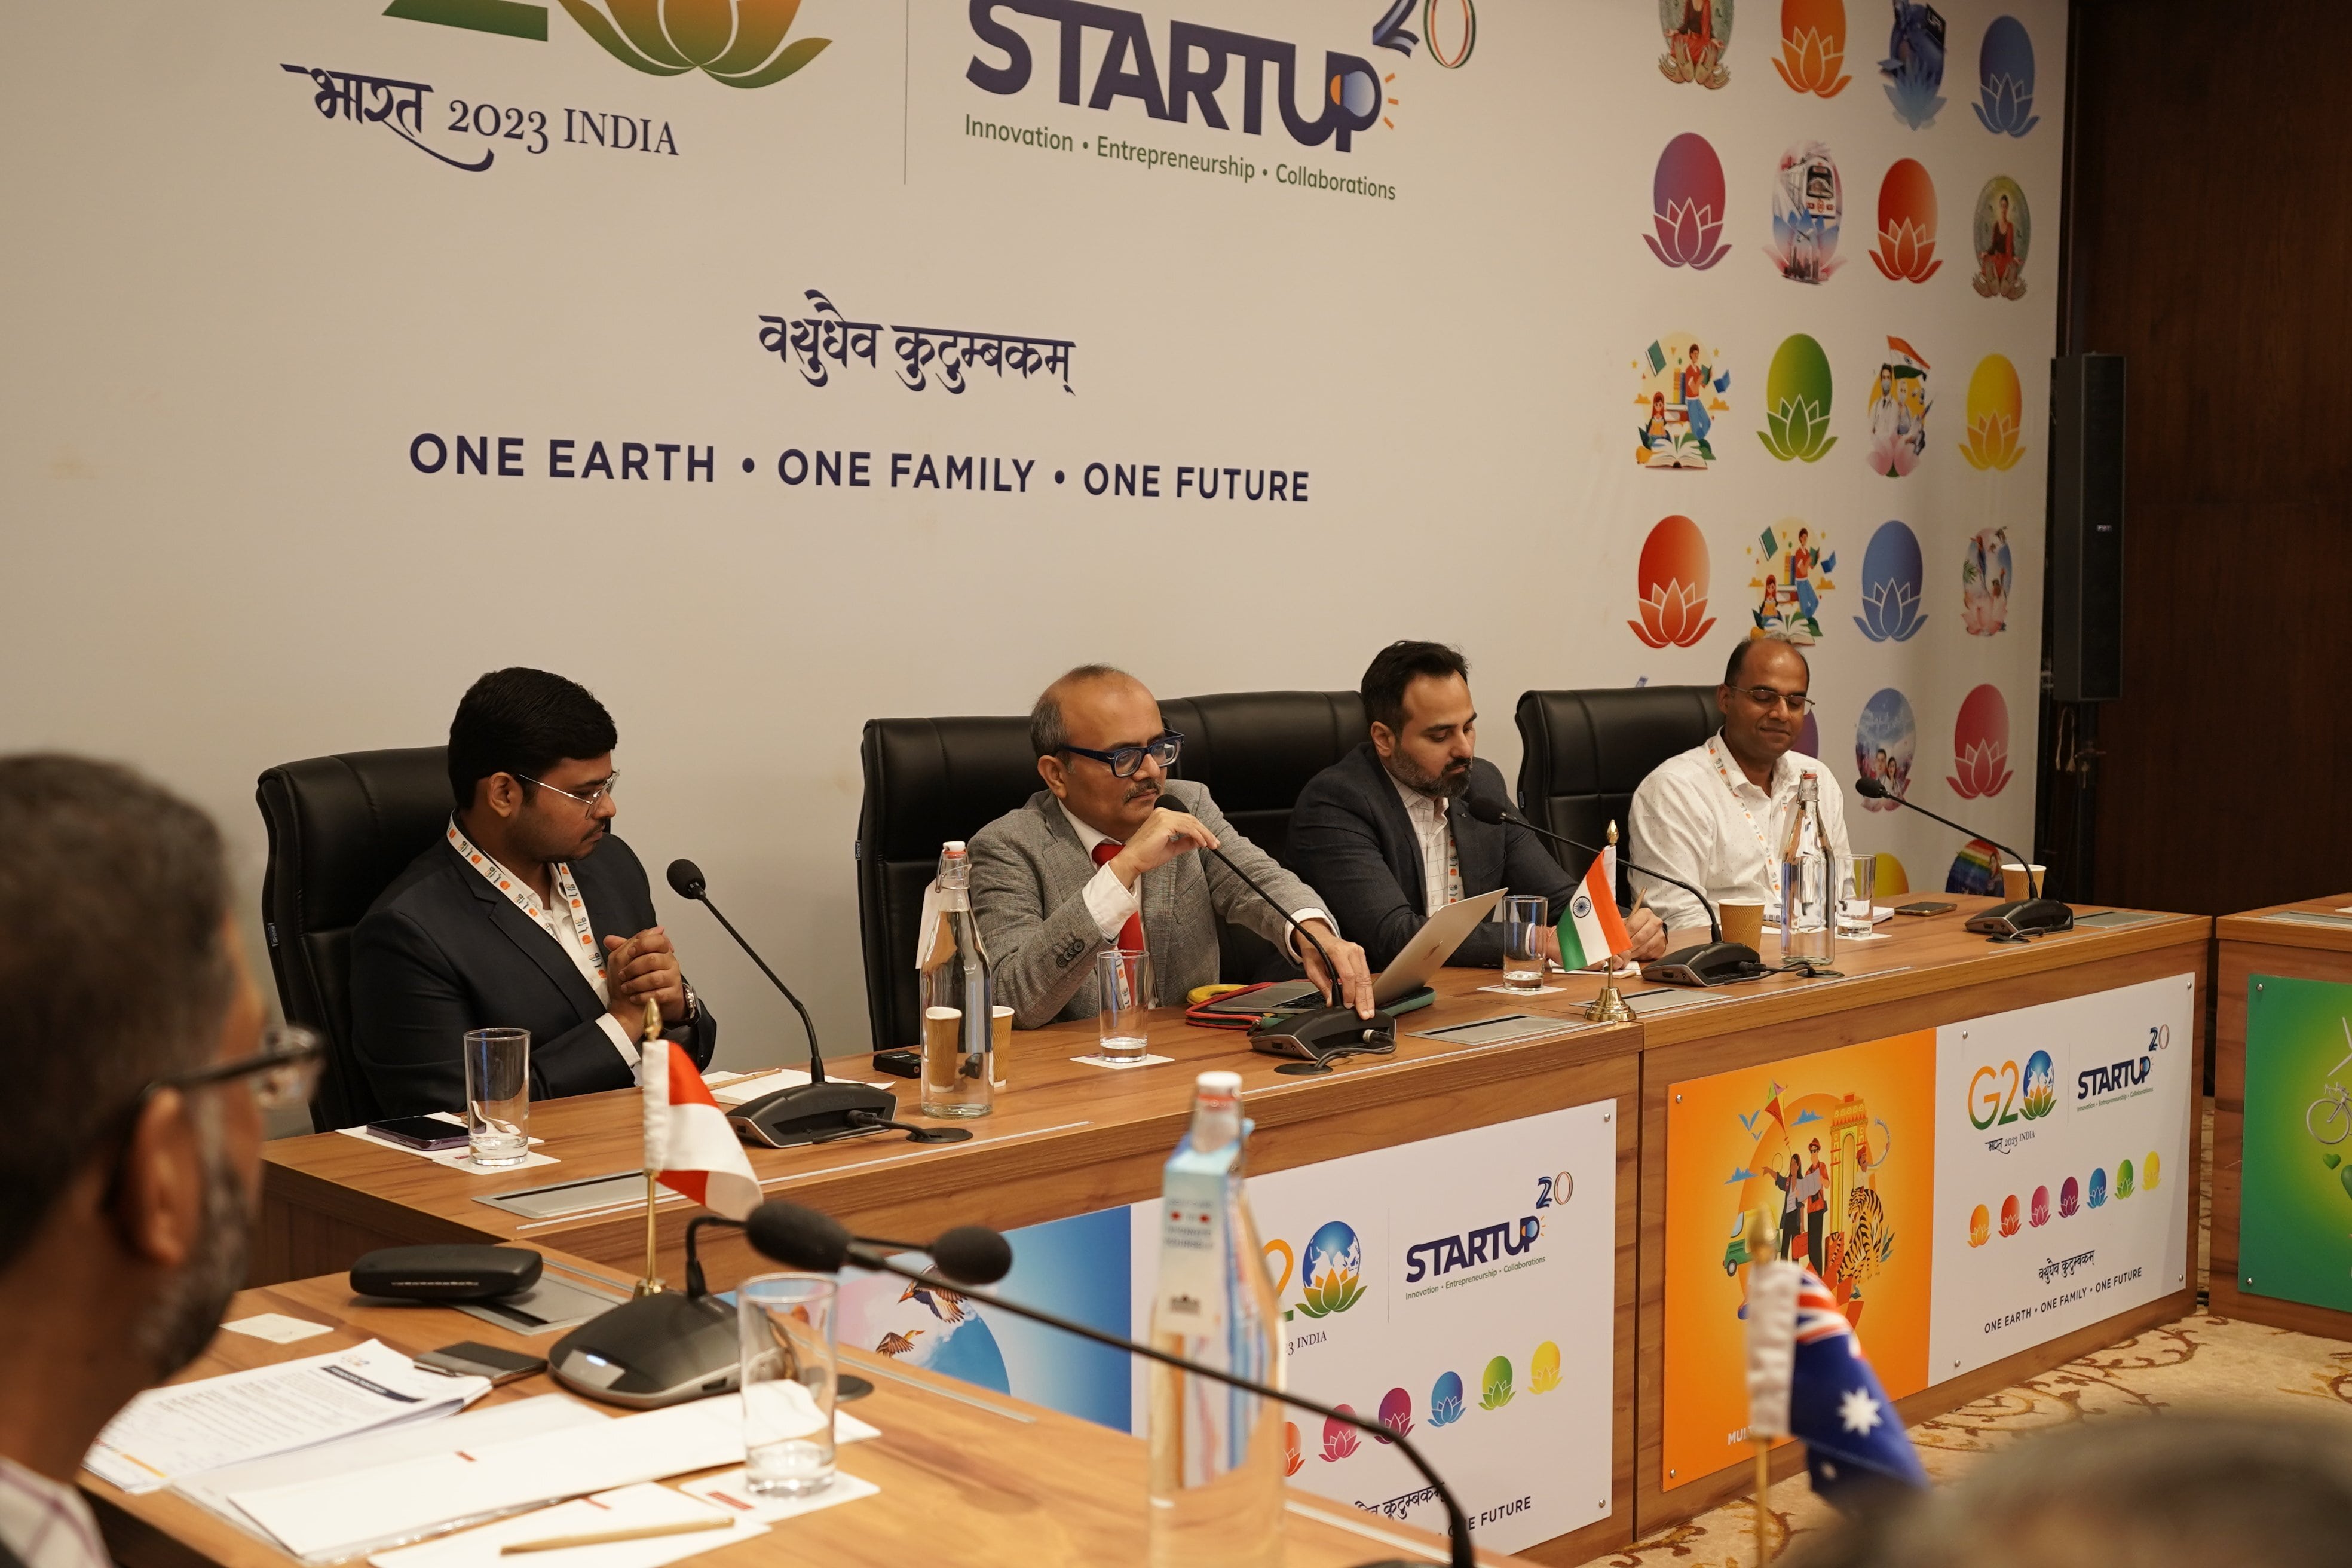 Startup20: Thriving to shape the future of global startup ecosystem